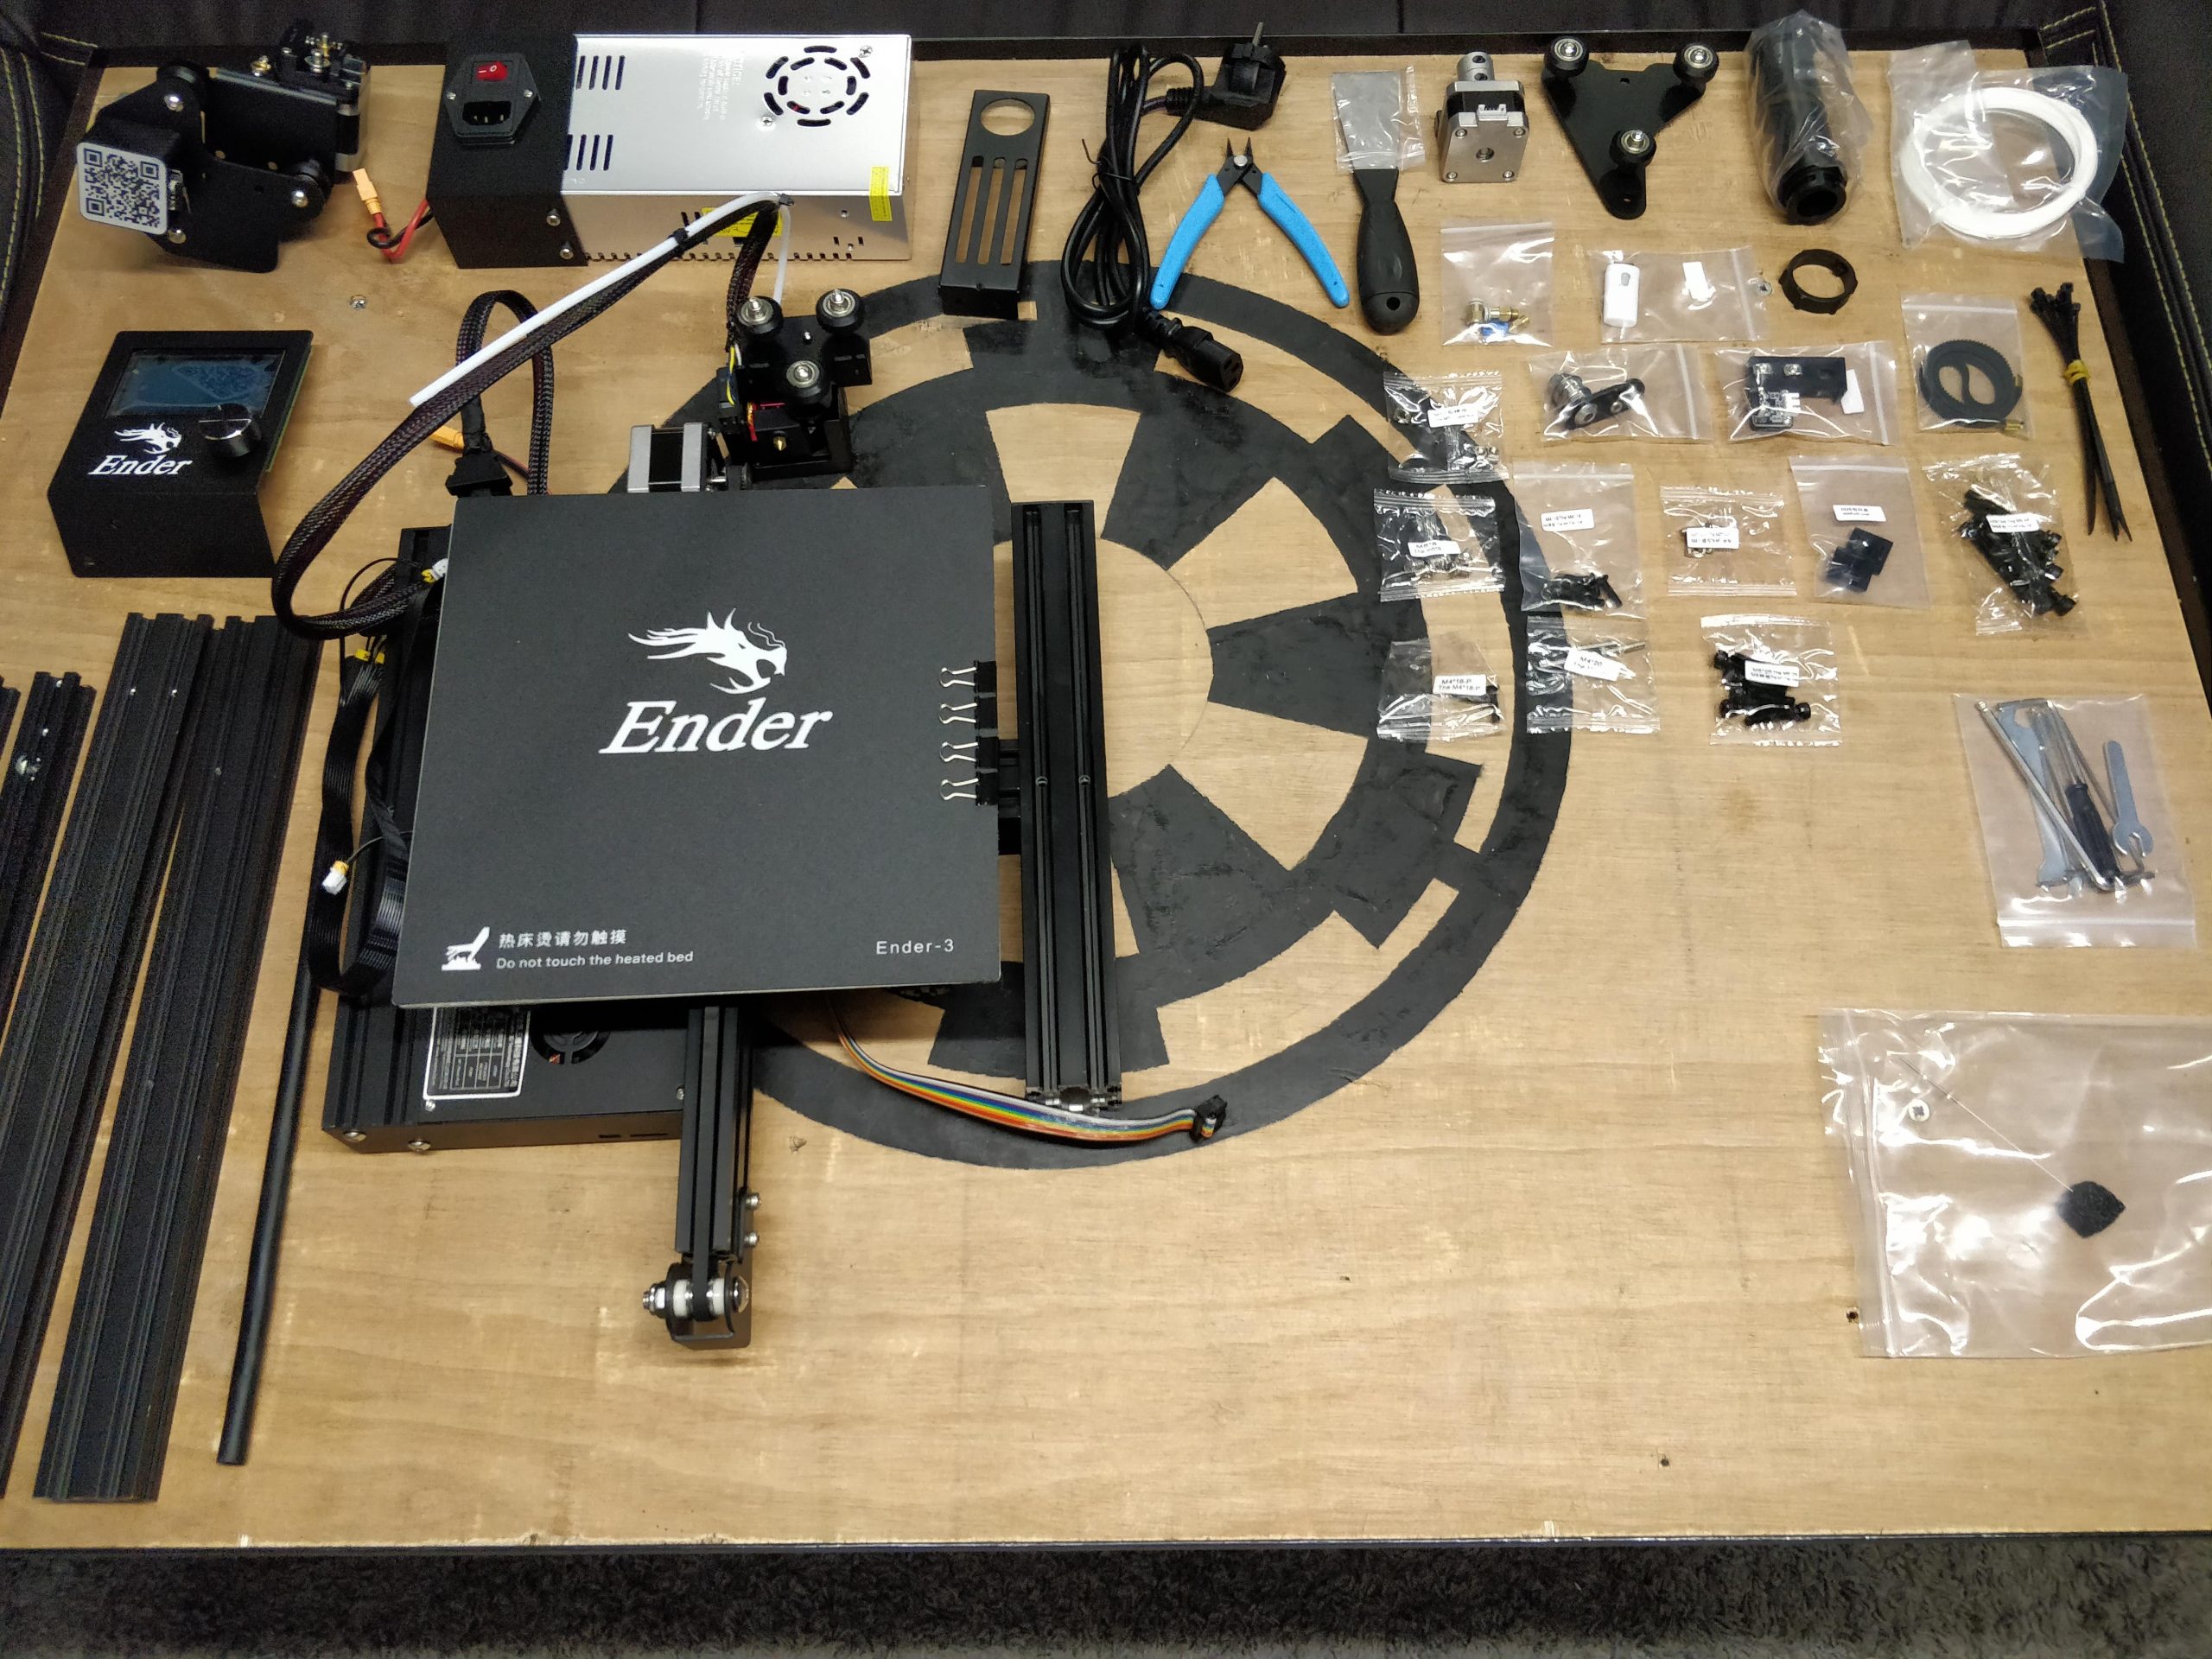 Ender 3 parts on table